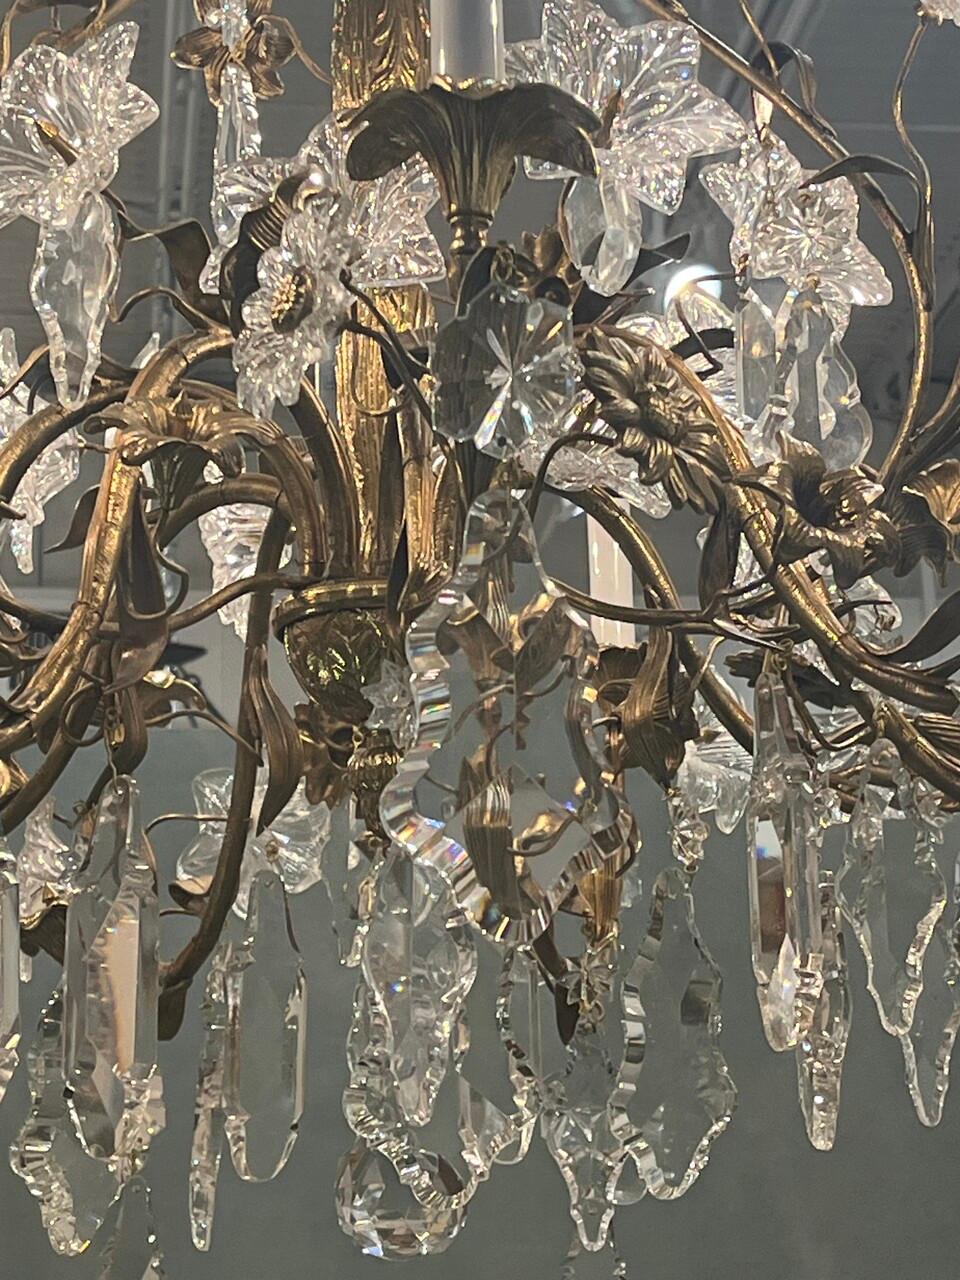 Experience the opulence of the 19th century with this exquisite Rococo-style crystal chandelier. Adorned with intricate floral motifs and gilded accents, its eight bulbs cast a soft, romantic glow, transforming any space into a grand ballroom or an